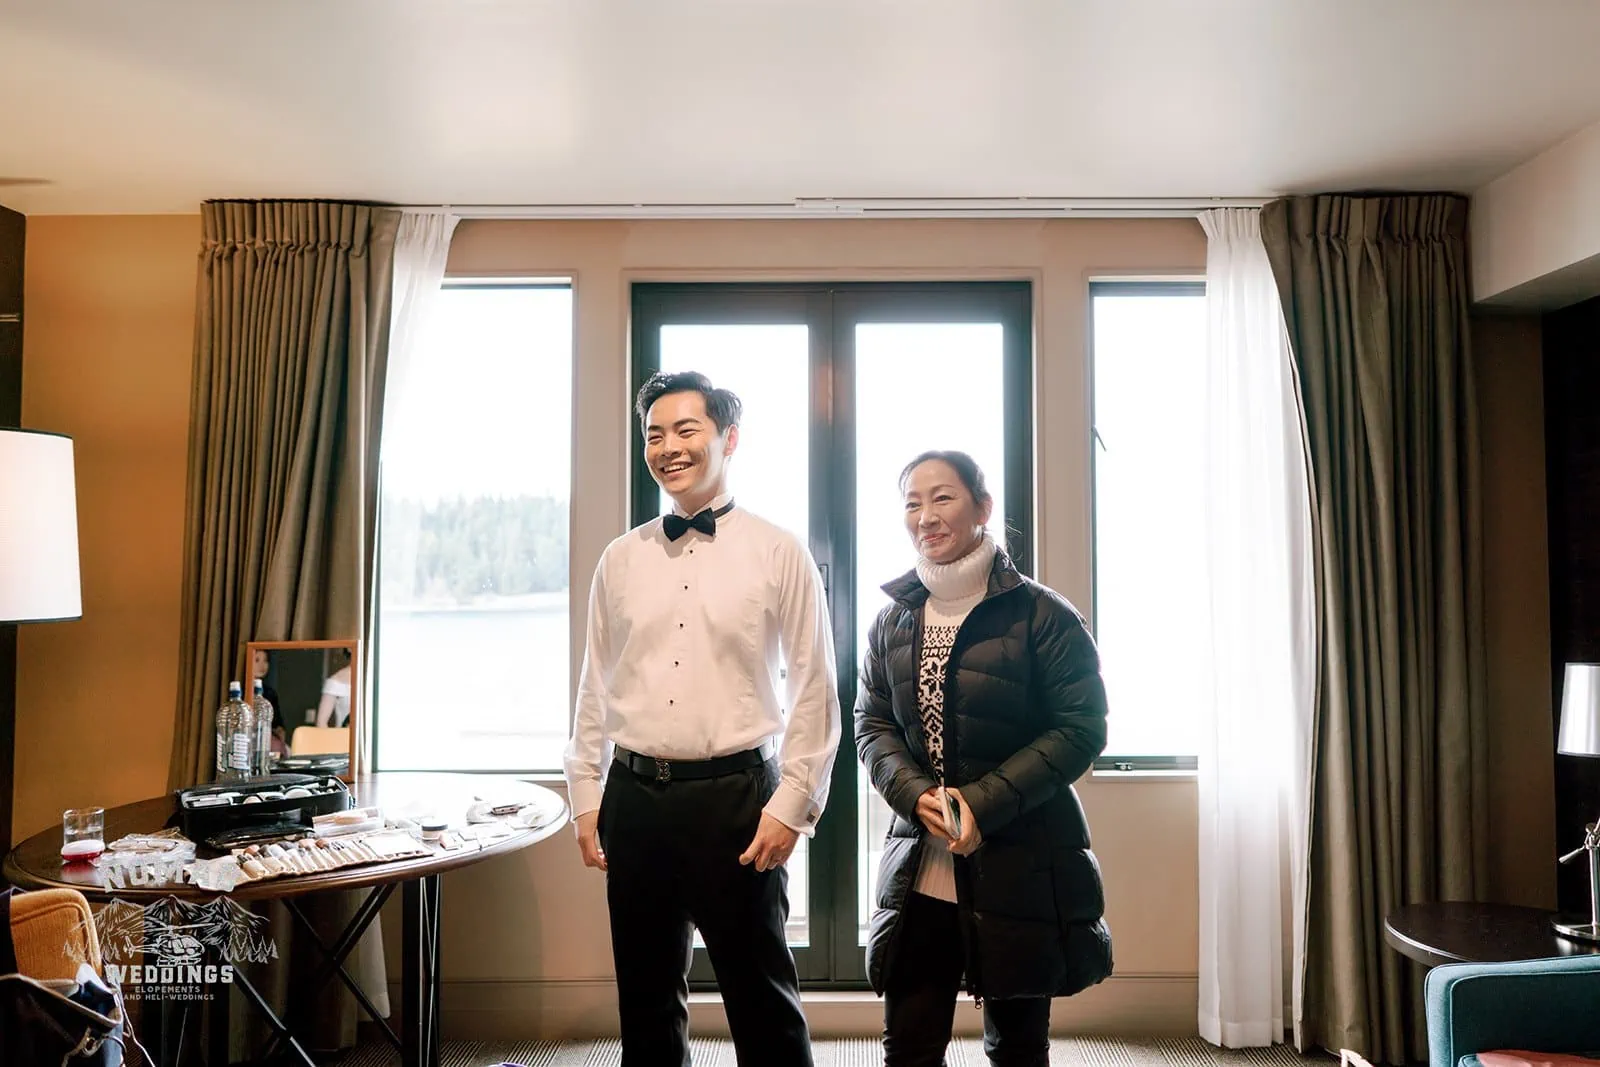 Queenstown New Zealand Elopement Wedding Photographer - Bo and Junyi doing a pre-wedding photoshoot in a hotel room.